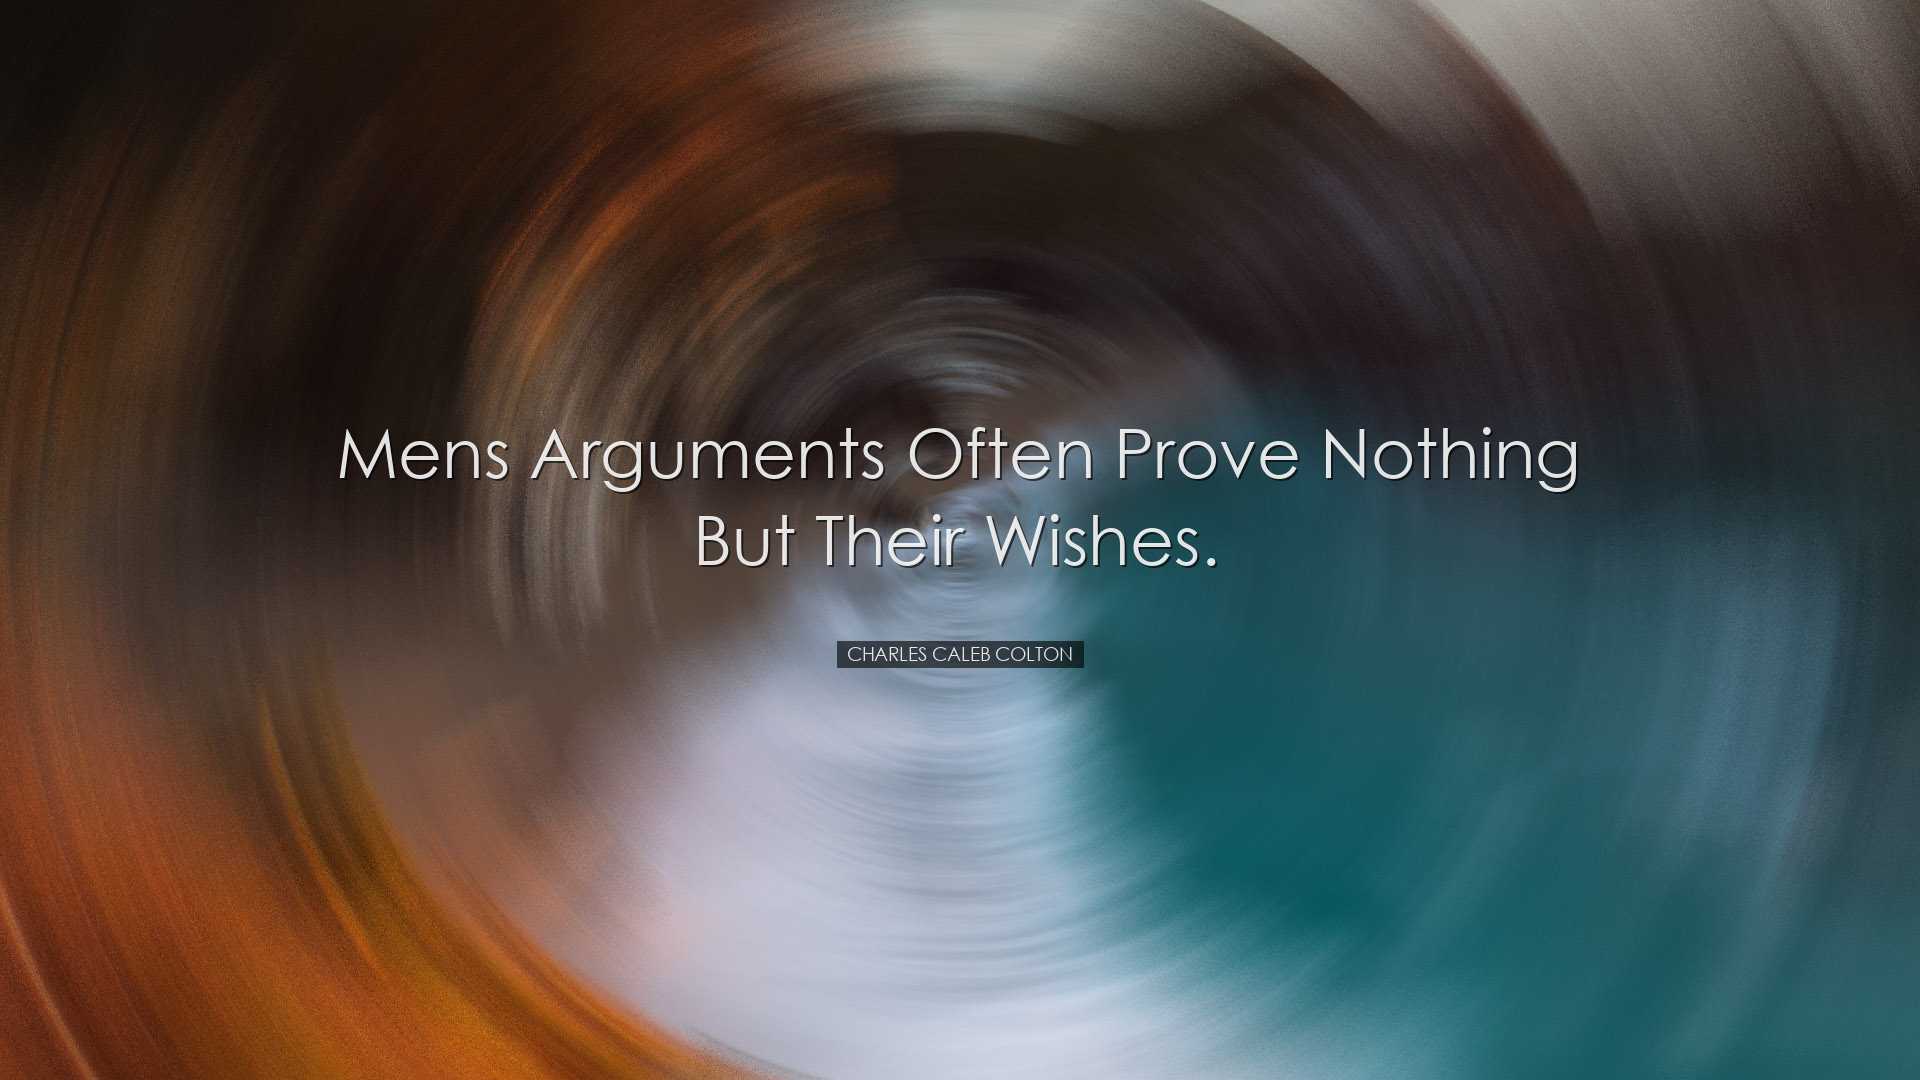 Mens arguments often prove nothing but their wishes. - Charles Cal